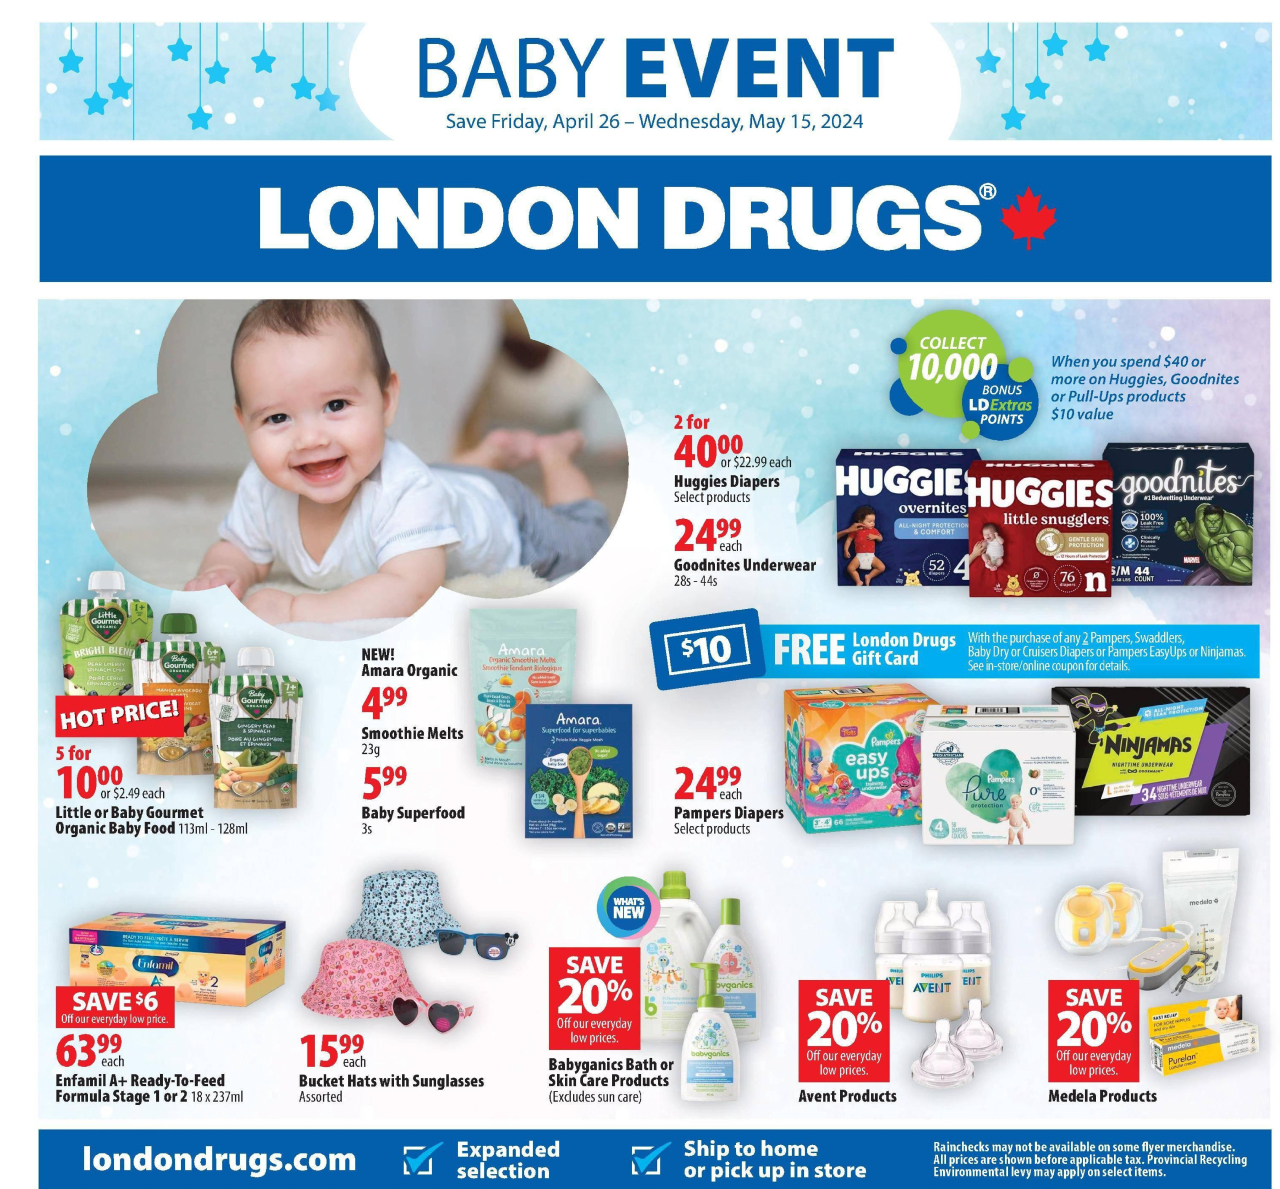 London Drugs Flyer - Baby Event from Apr. 26, 2024